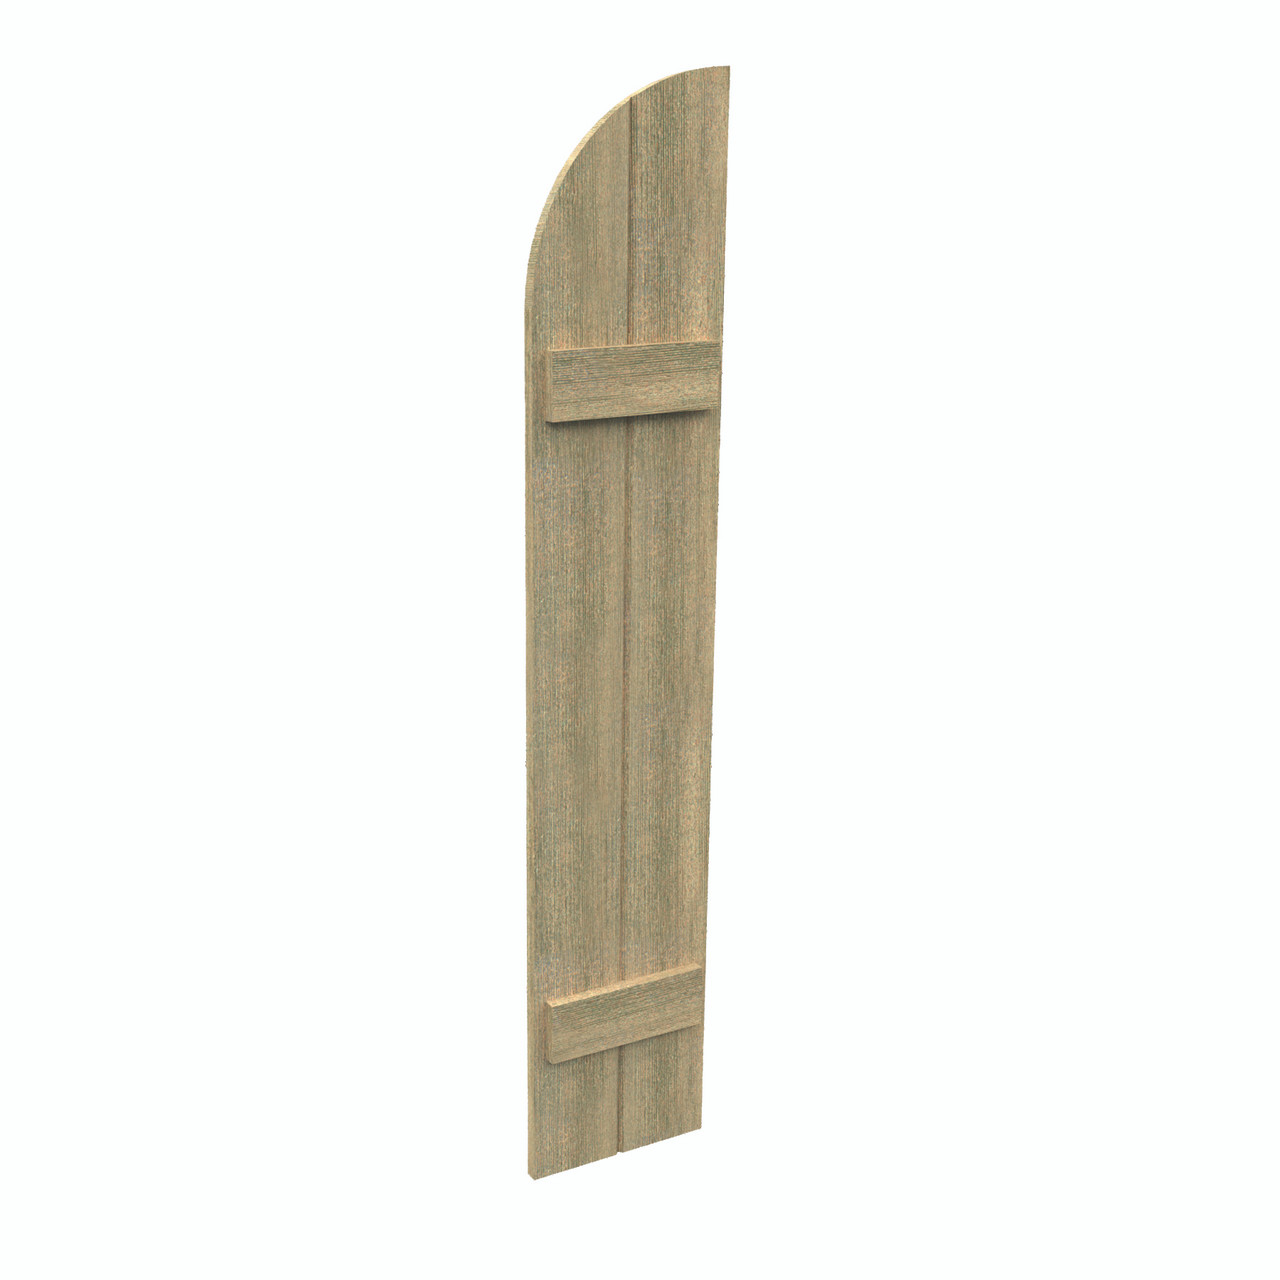 12 inch by 57 inch Quarter Round Shutter with 2-Boards